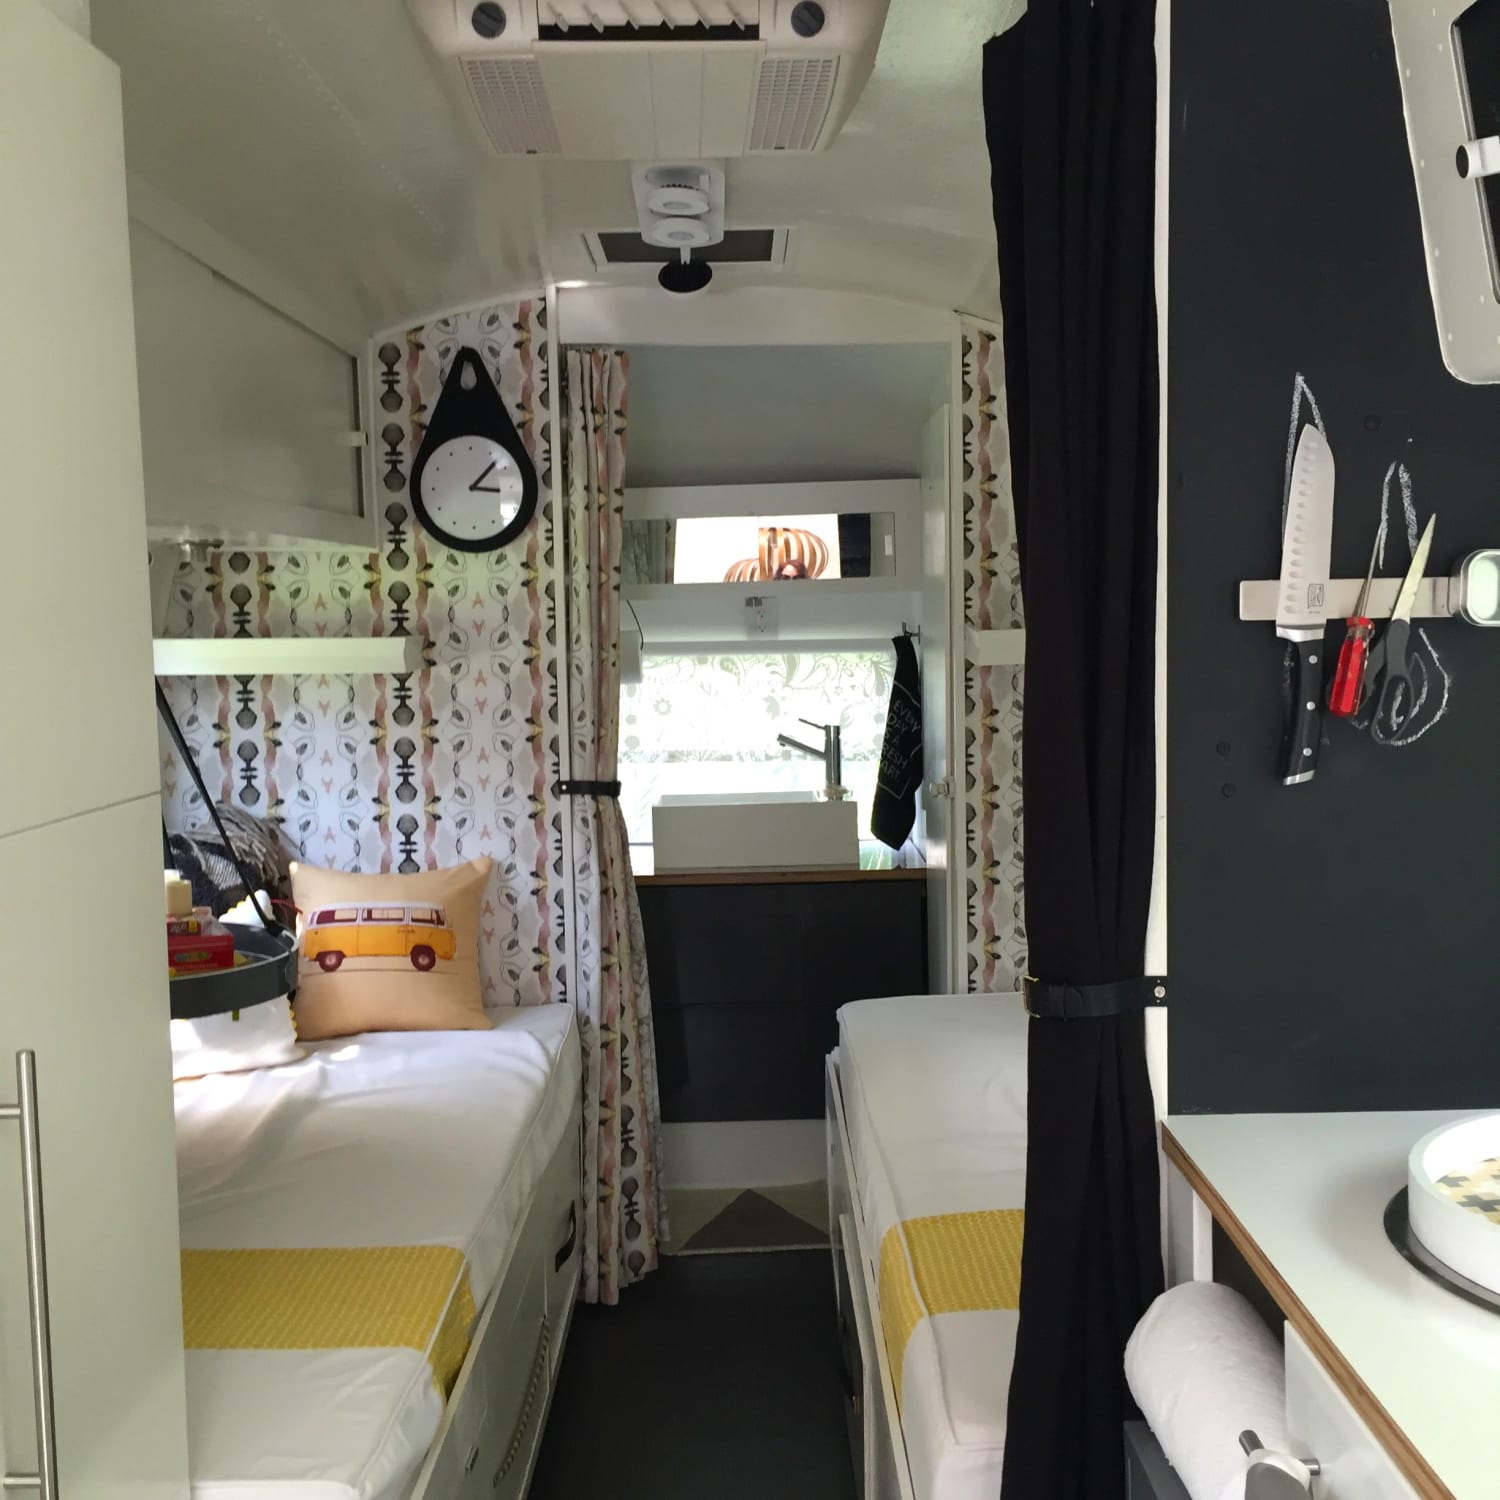 Rare Western Pacific Airstream Trailer Makeover - Timeless Travel Tiny Home